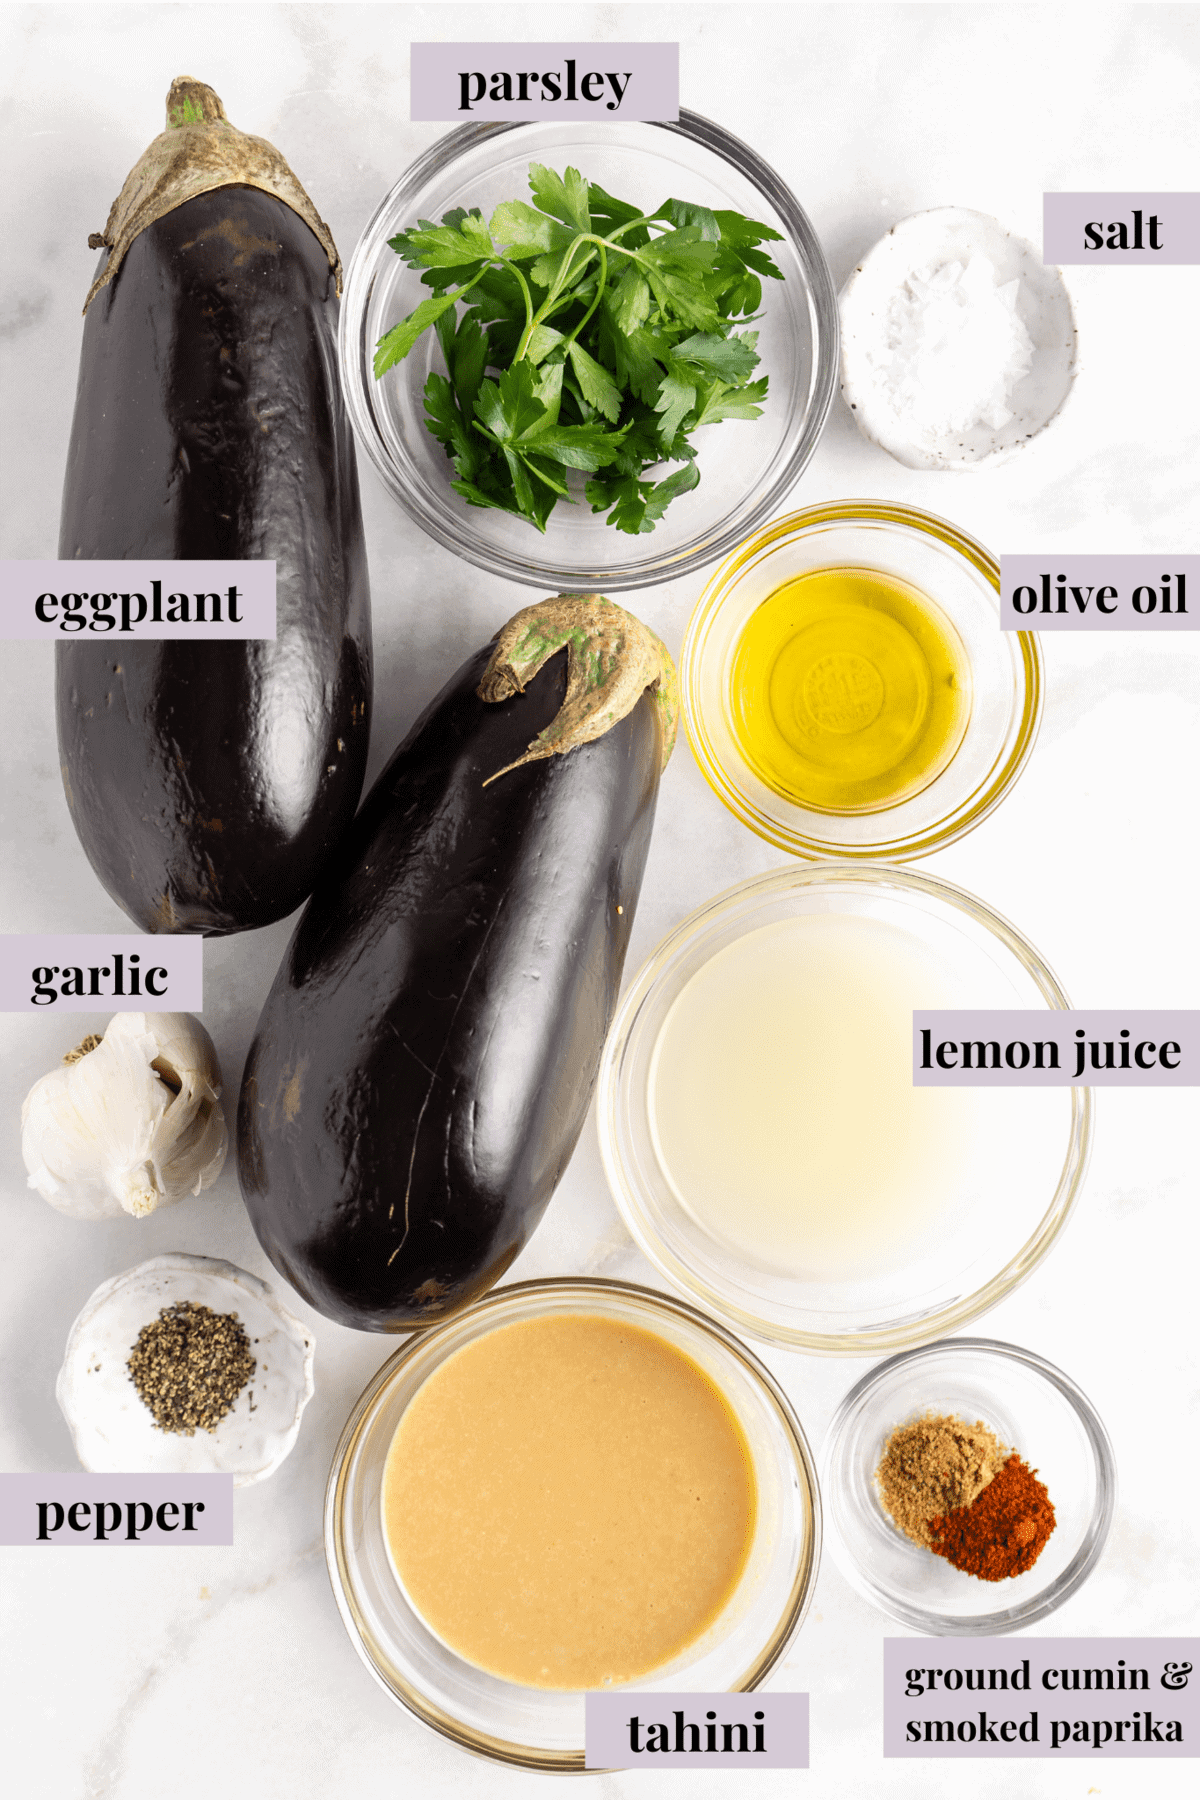 Overhead view of baba ghanoush ingredients